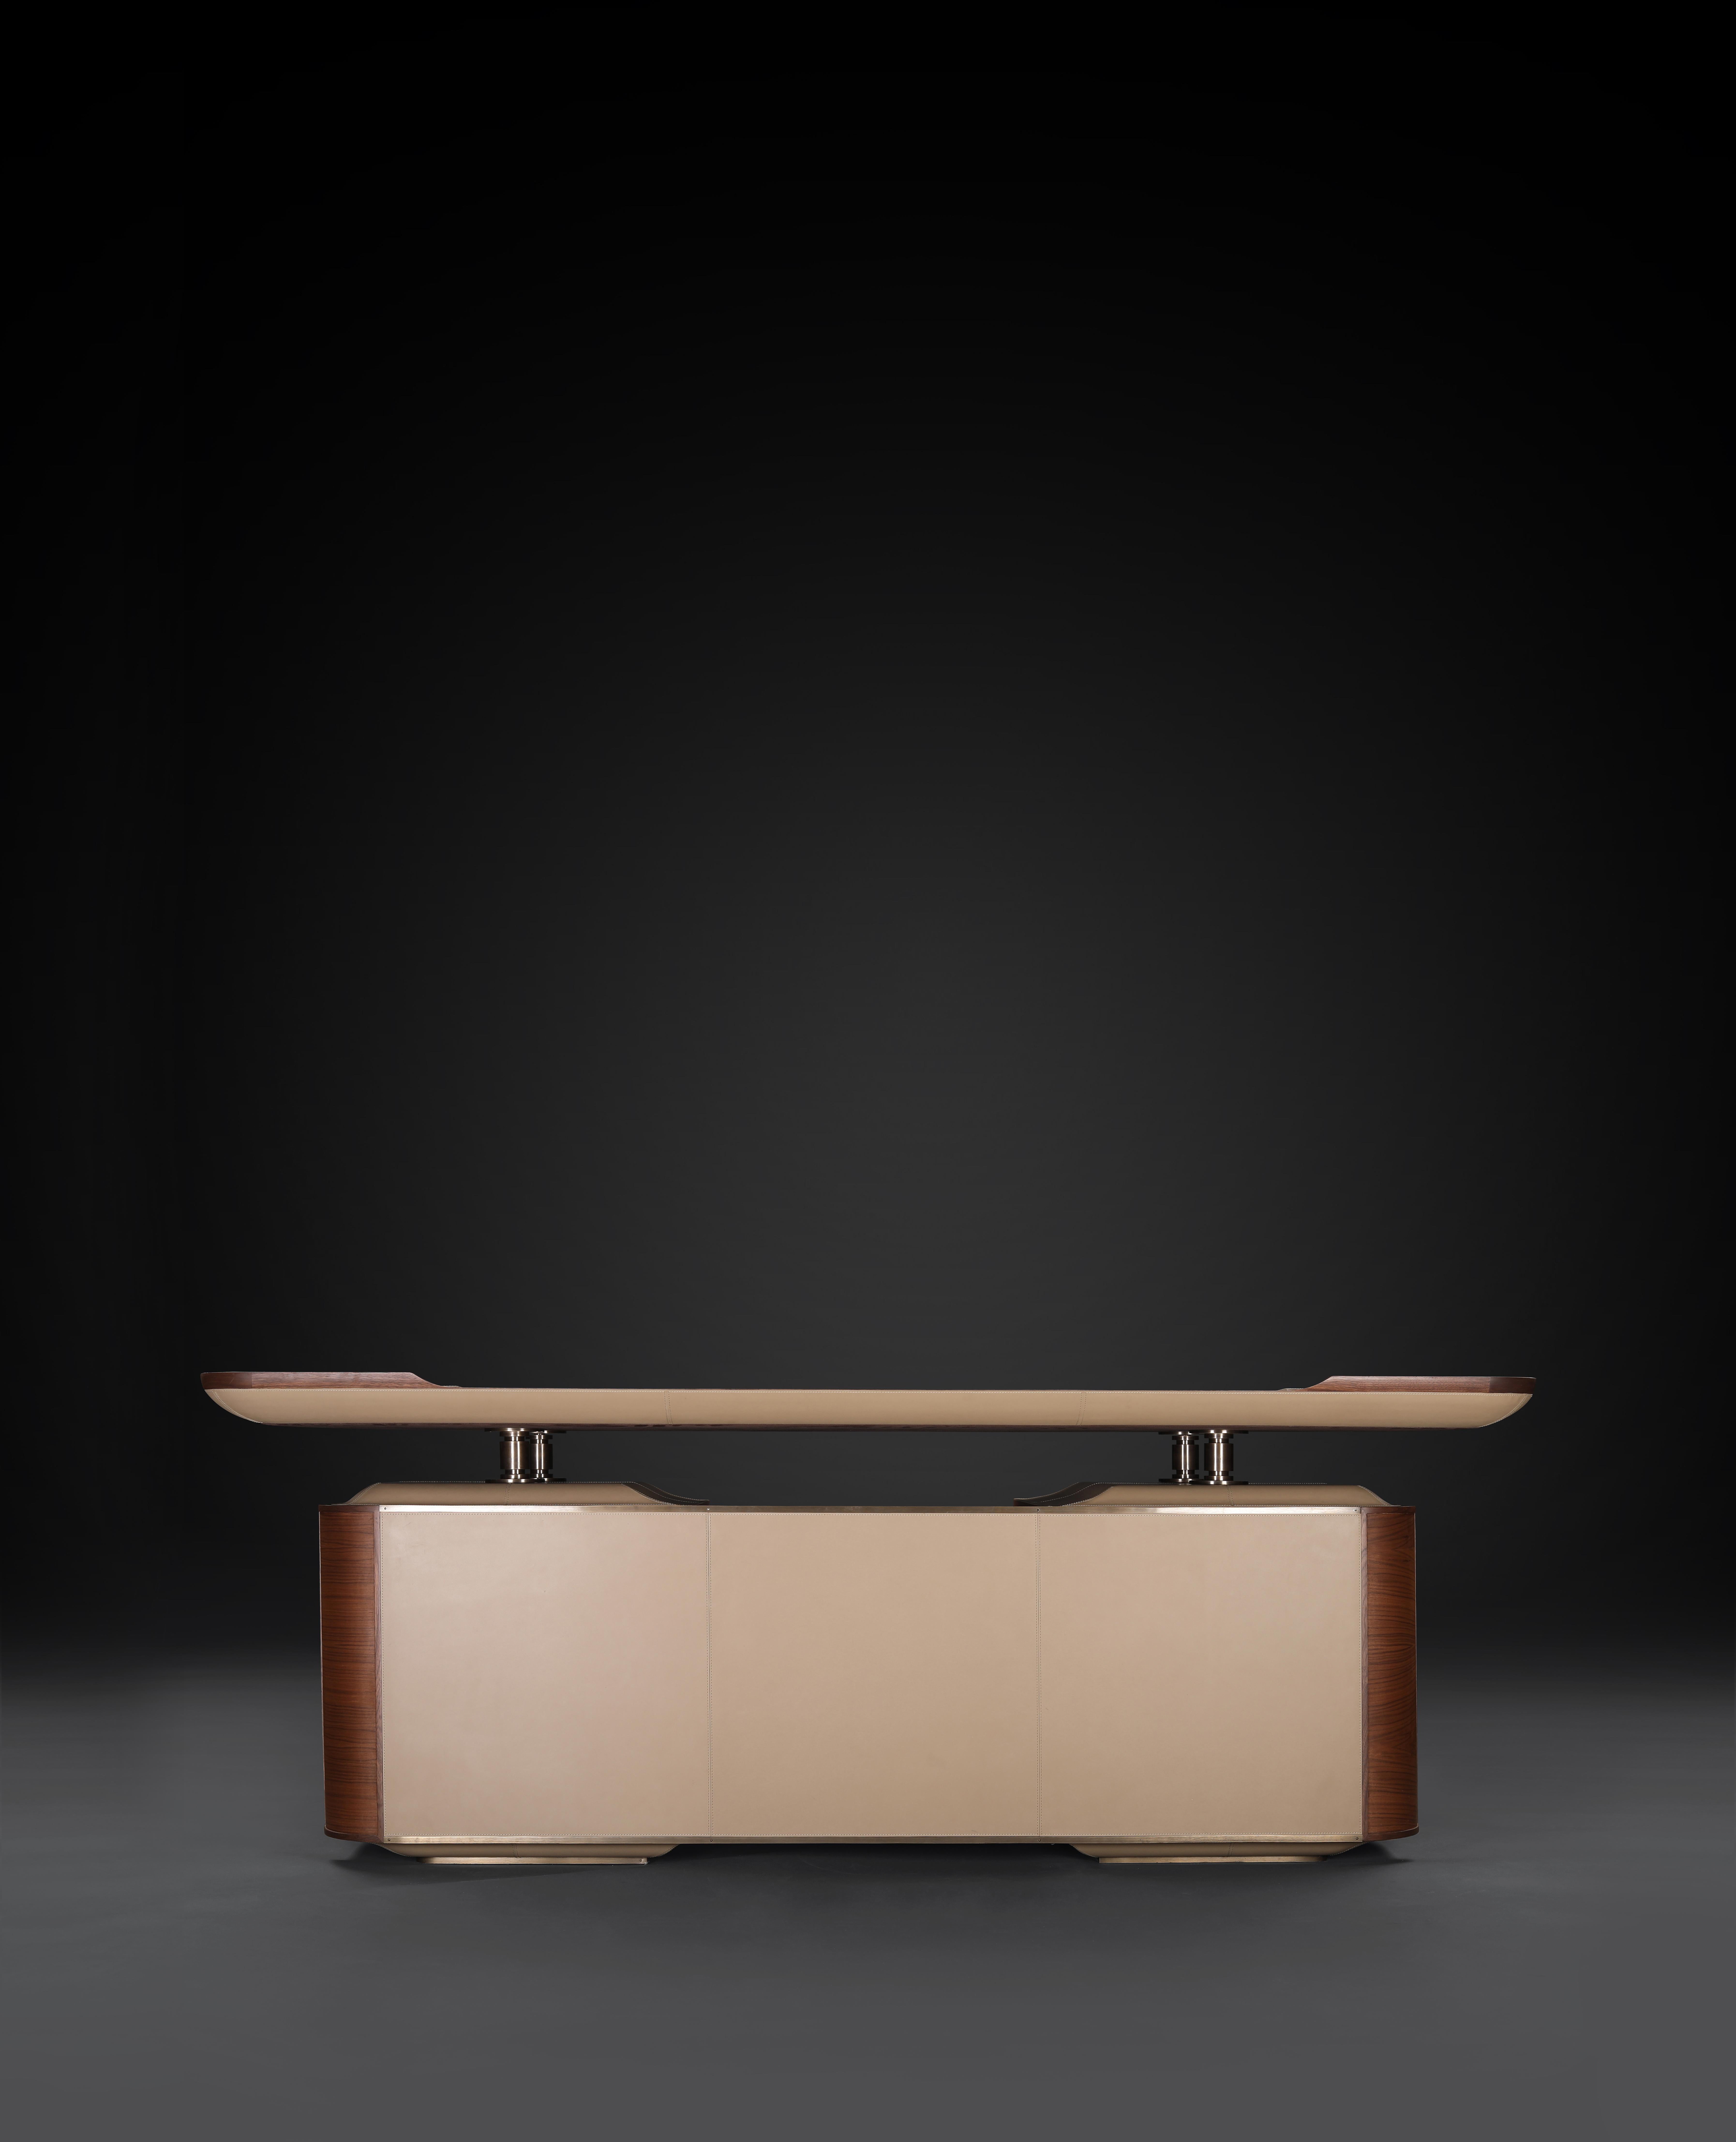 Calen desk by Madheke.
Dimensions: D 90 x W 210 x H 78.5 cm.
Materials: leather, wood, veneer, metal.

Classic leather front and upper, dead matte veneer, bronzed metal detailing.

Reflecting the finest in craftsmanship, innovation and